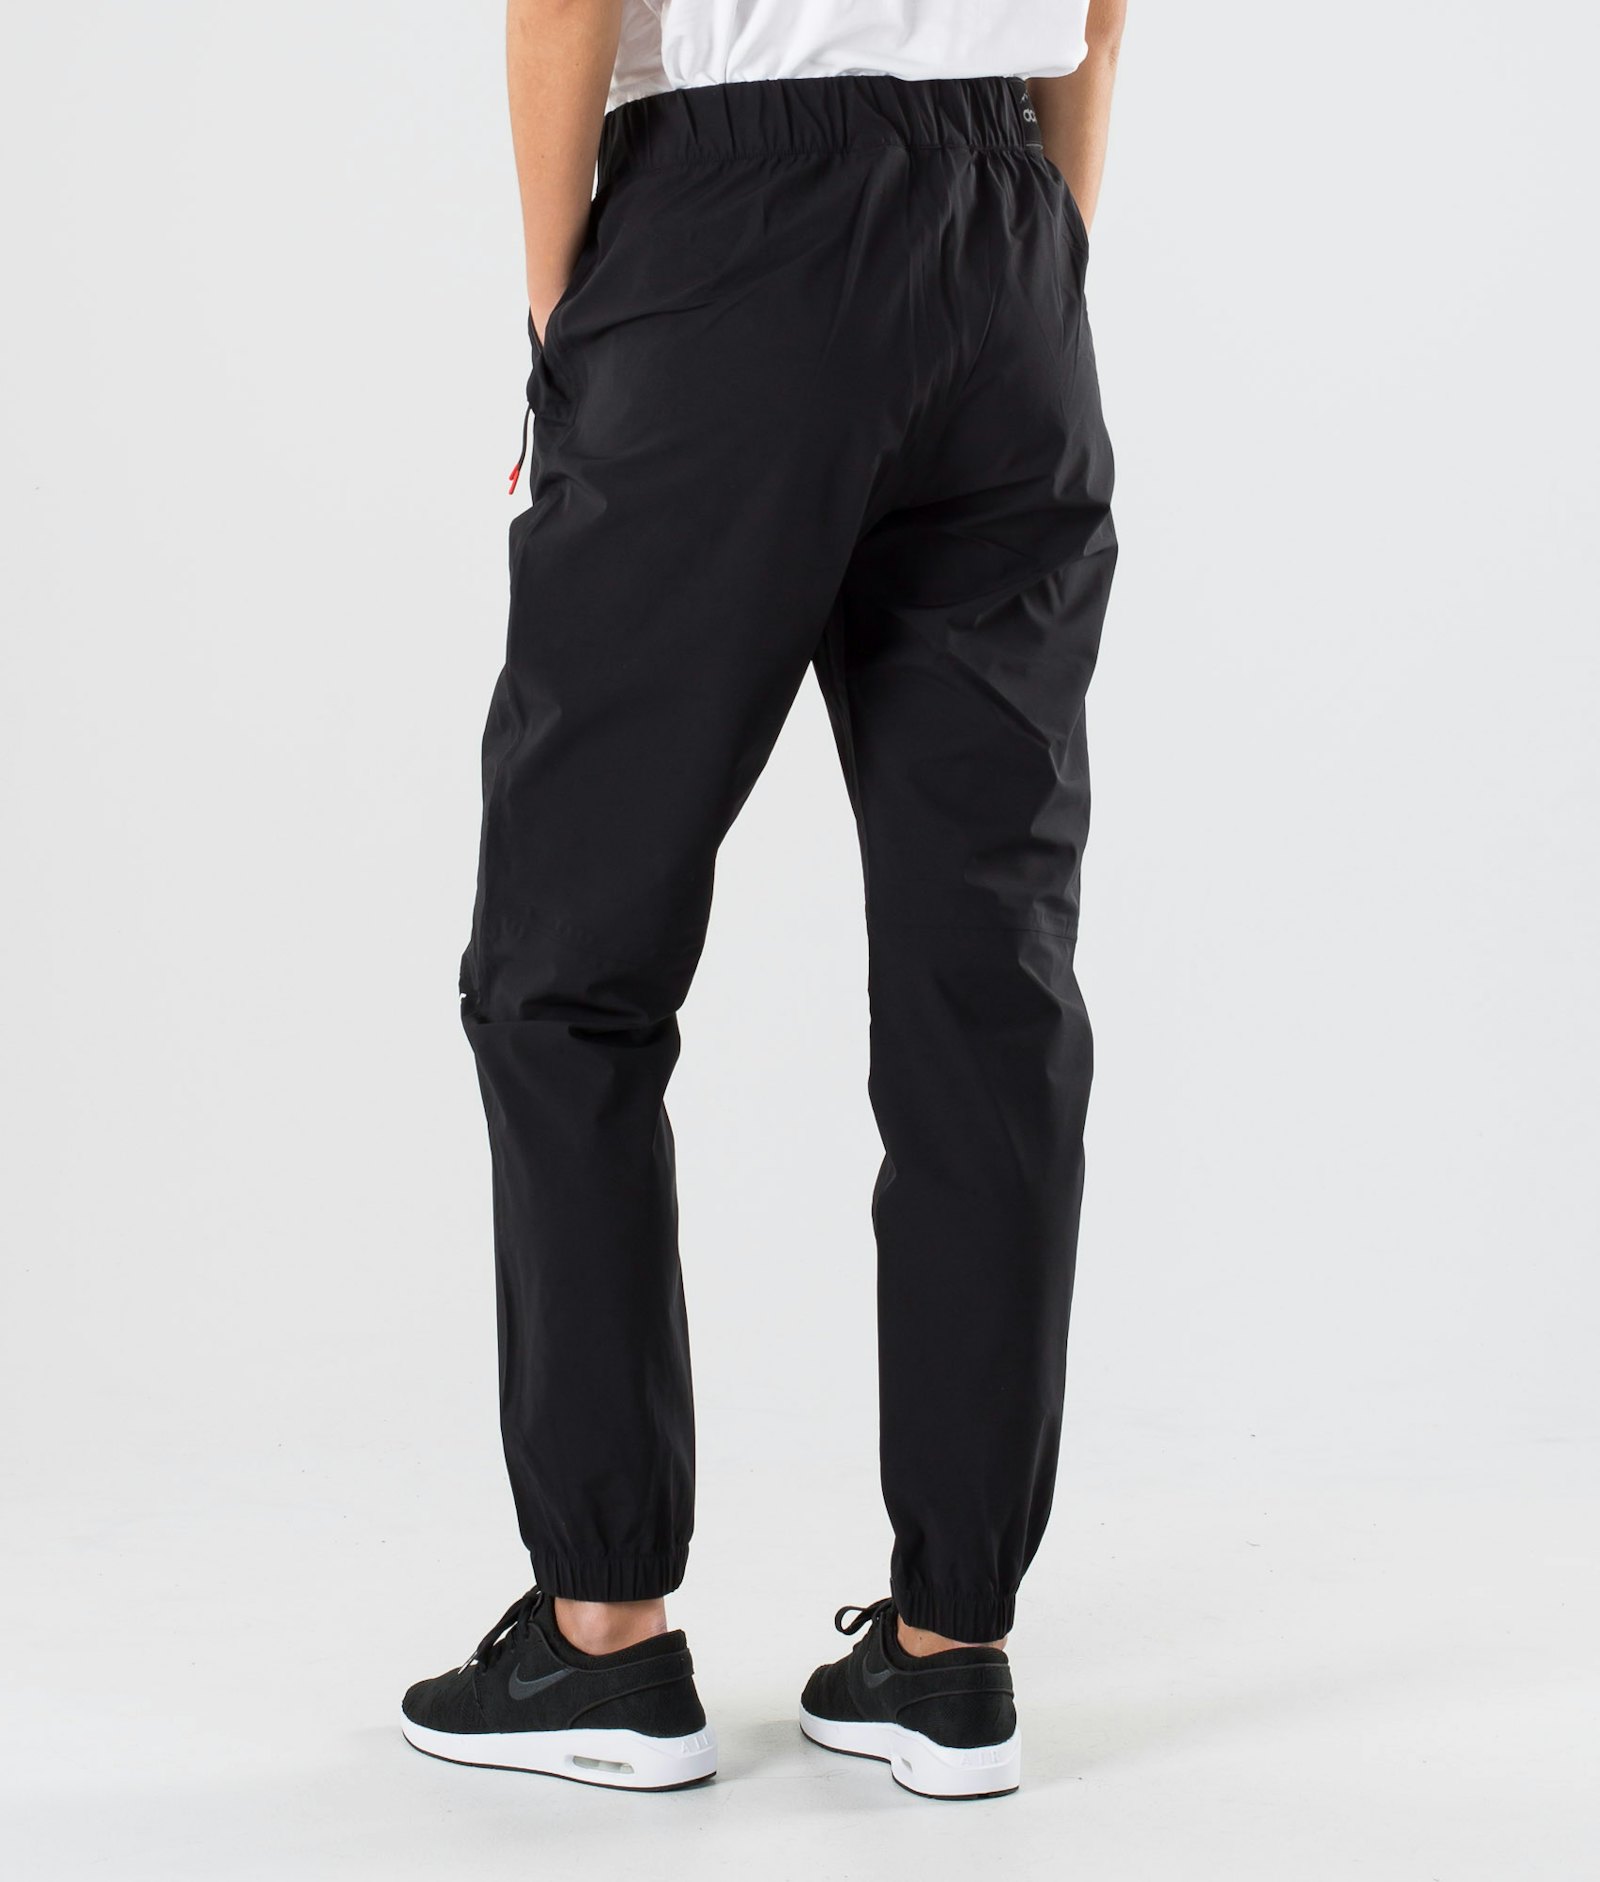 Dope Drizzard W 2020 Pantalones Impermeables Mujer Black - Negro